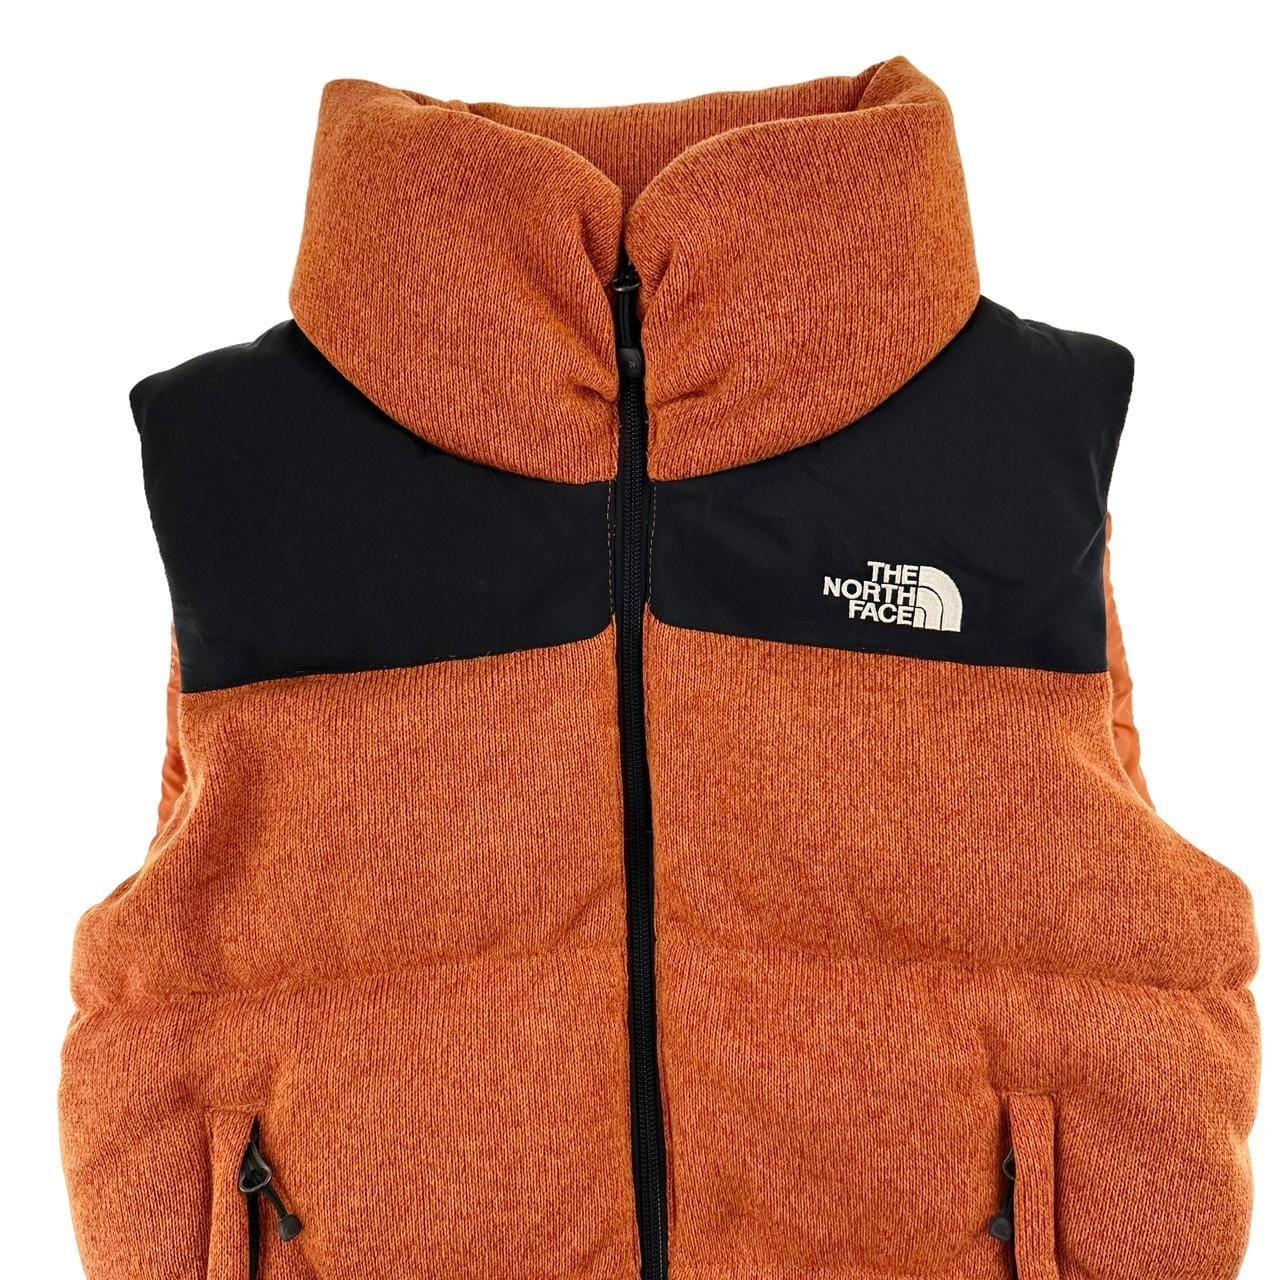 North Face gilet woman’s size M - Known Source